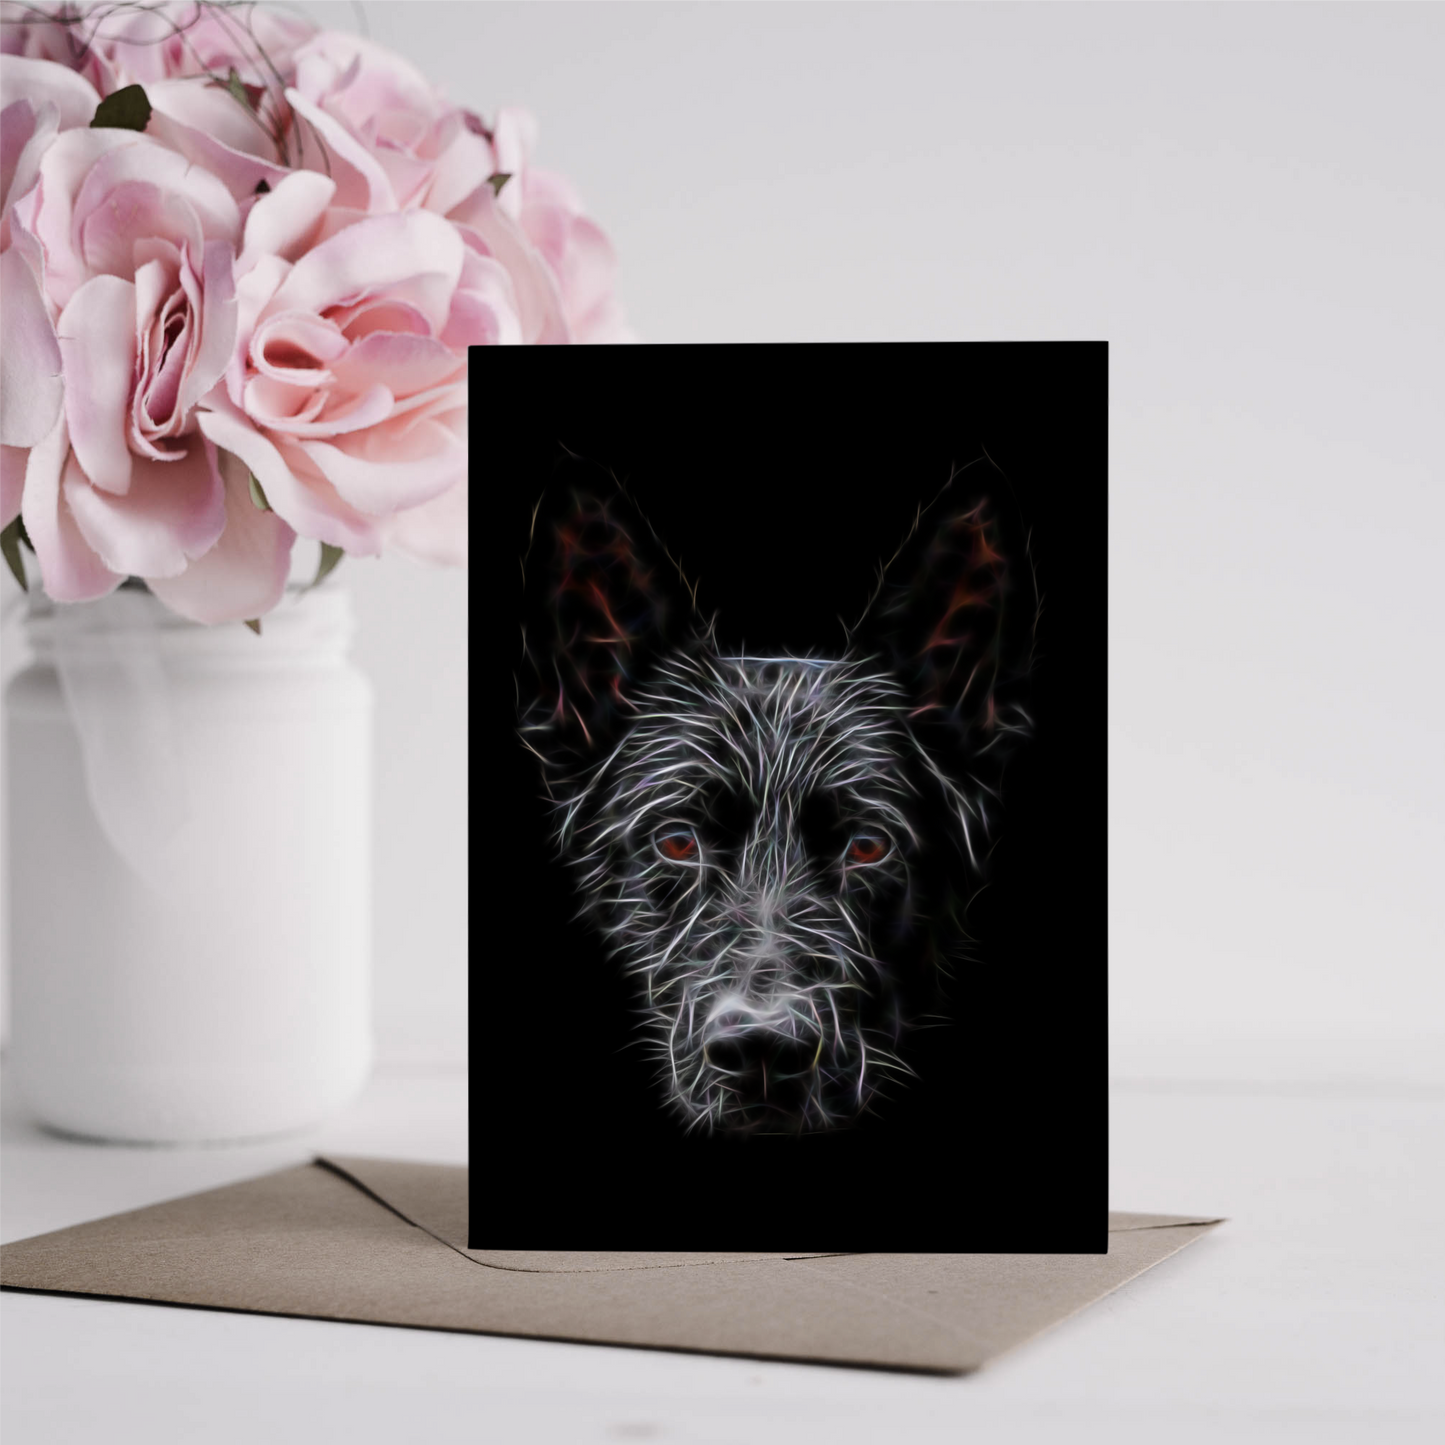 Black German Shepherd Greeting Card Blank Inside for Birthdays or any other Occasion